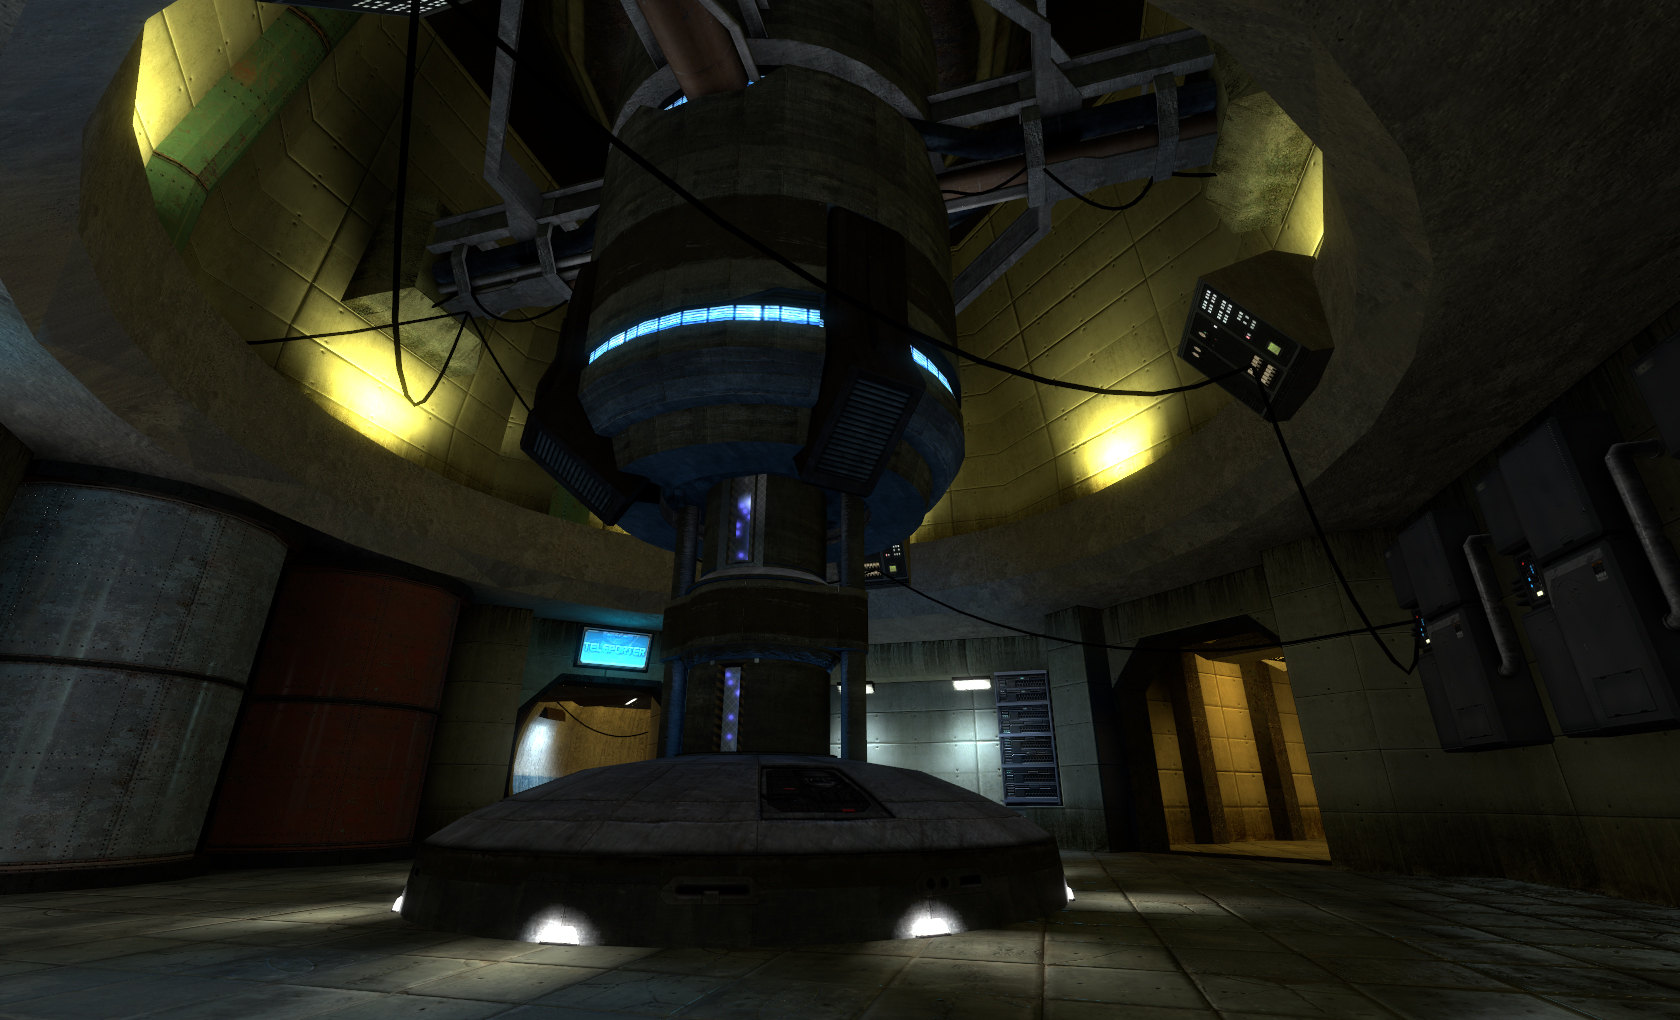 Cyberpunk Half-Life 2 mod, NeoTokyo, now available on Steam for free